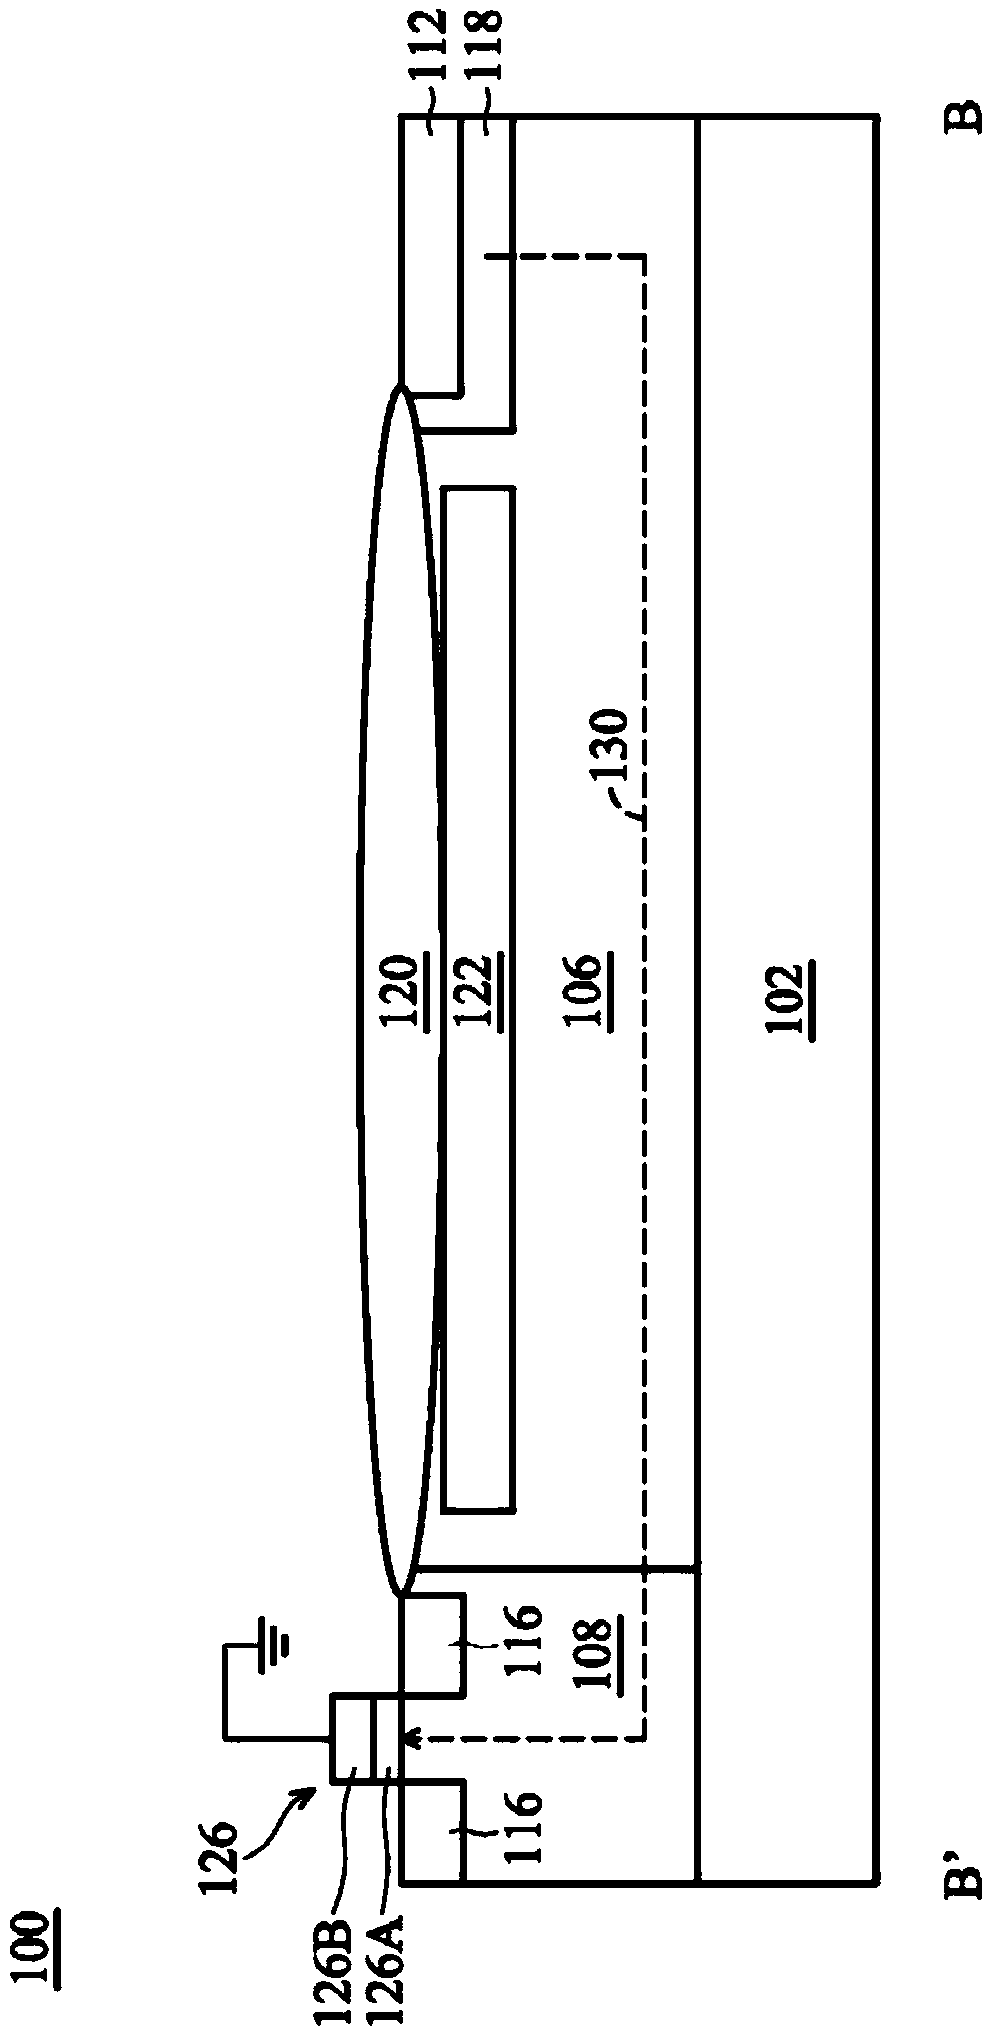 Laterally diffused metal oxide semiconductor field effect transistor